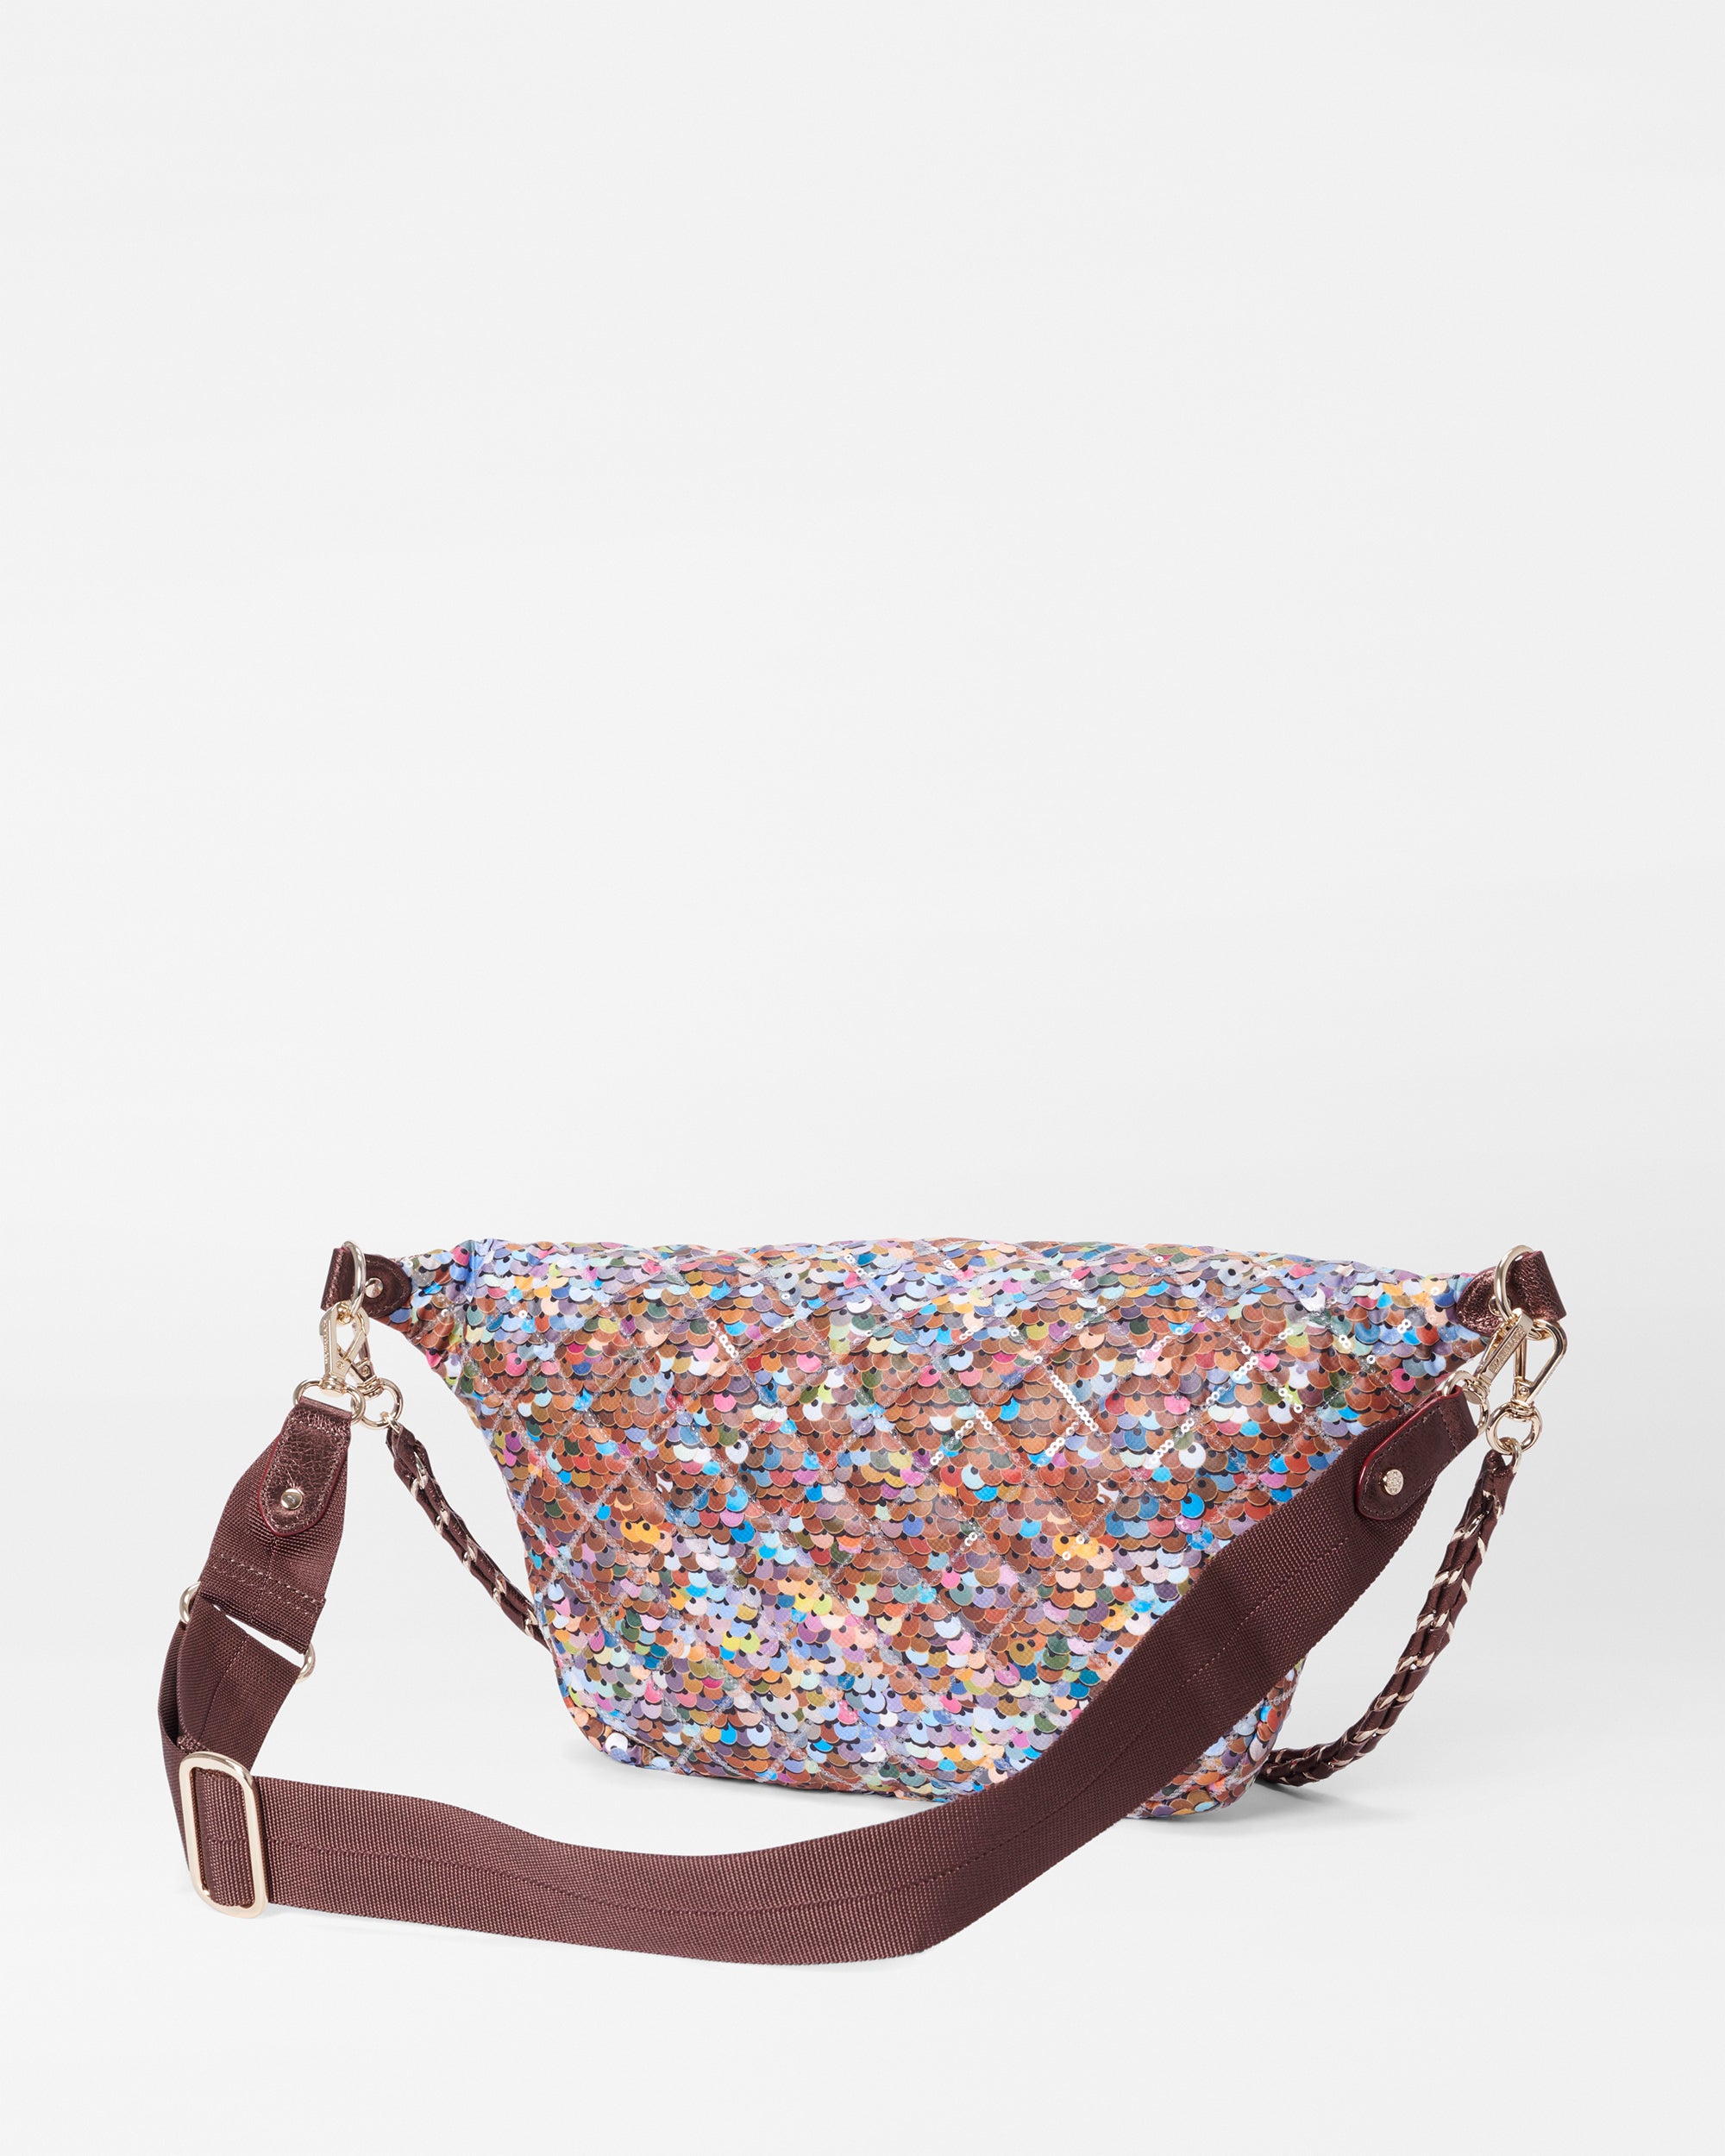 Made by Minga | Women's Woven Crossbody Bag with Adjustable Leather Strap | Natural | Plant-Dyed Natural Fiber